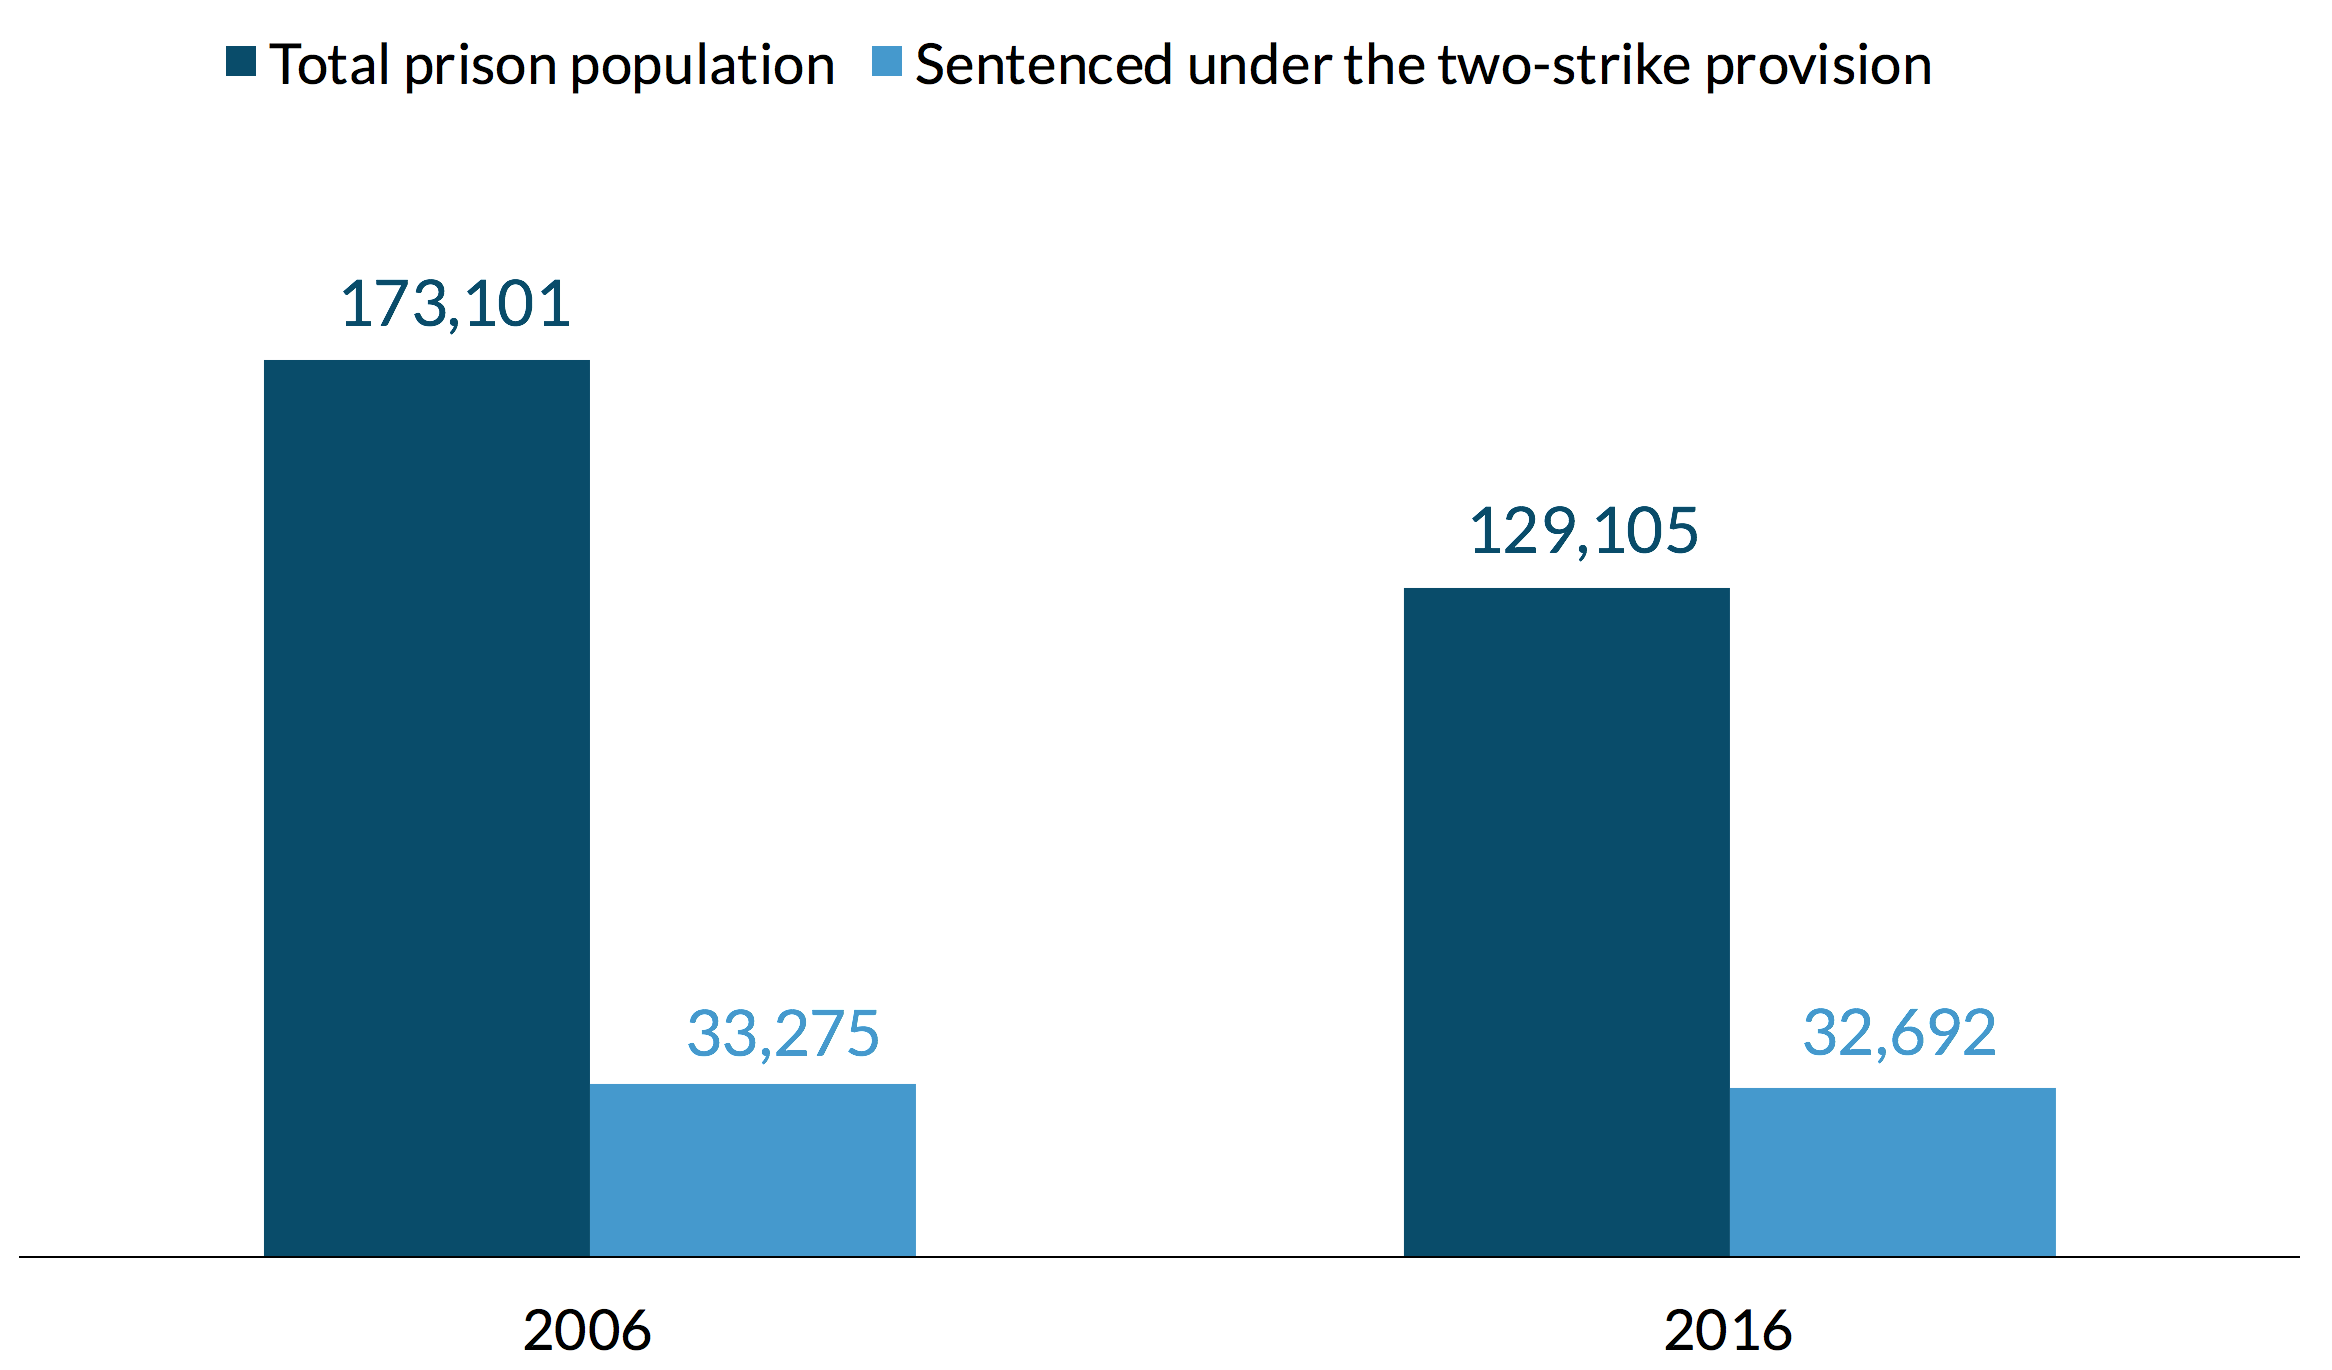 A bar chart demonstrating that california’s two-strike policy has been immune to reform. In 2006 the total prison population in California was 173,101 and the population sentenced under the two strike provision was 33,275. In 2016 the total prison population was 129,105 and the population sentenced under the two strike provision was 32,692.